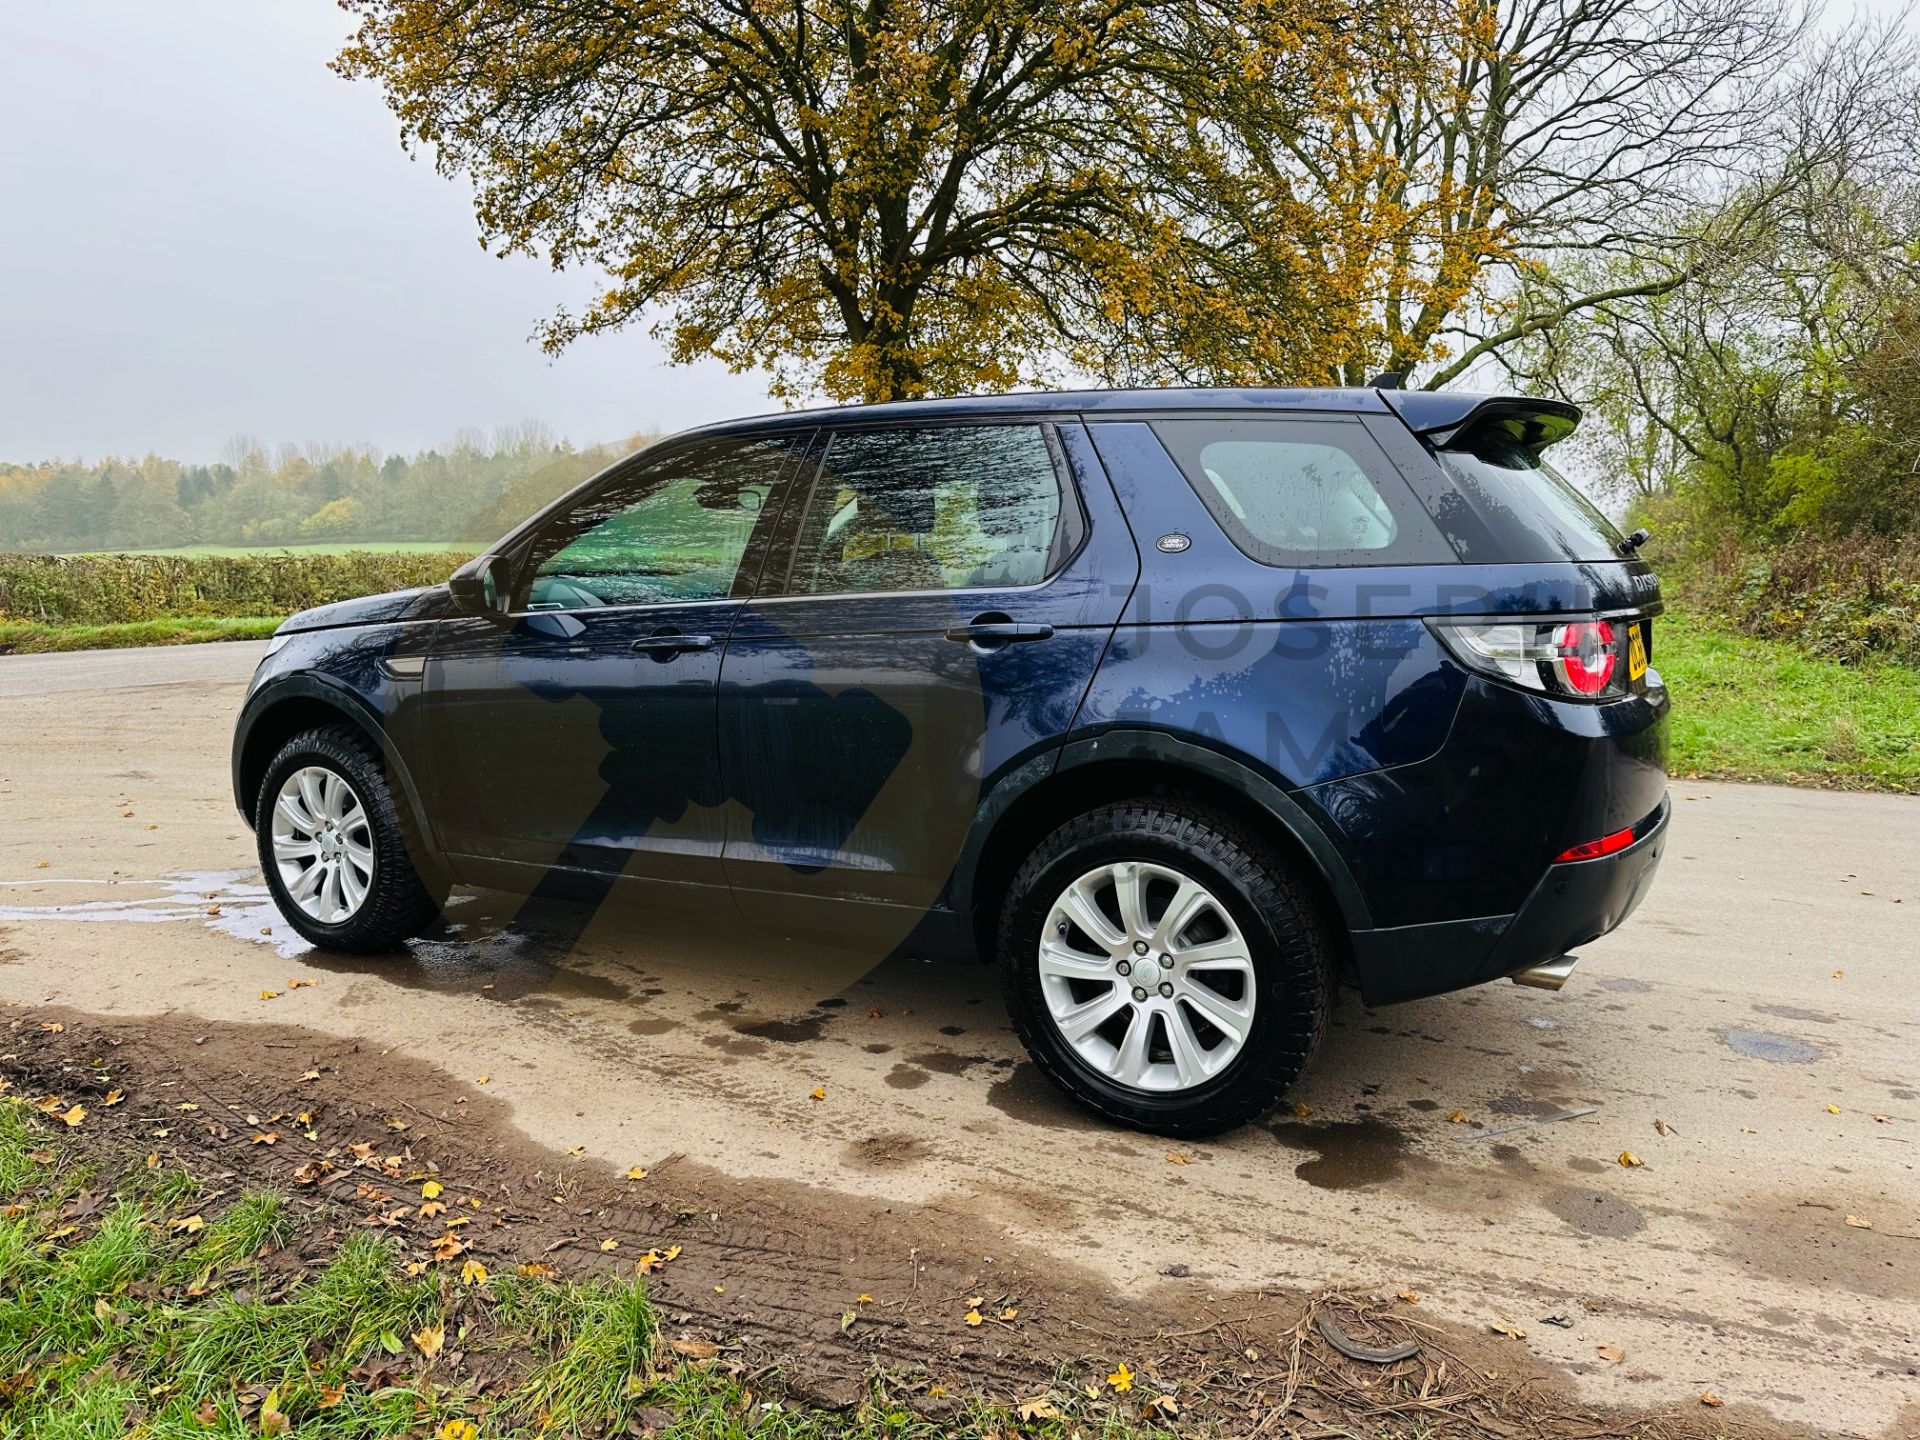 (ON SALE) LAND ROVER DISCOVERY SPORT *SE TECH* 2017 MODEL - FULL SERVICE HISTORY -1 OWNER - NO VAT!! - Image 9 of 43